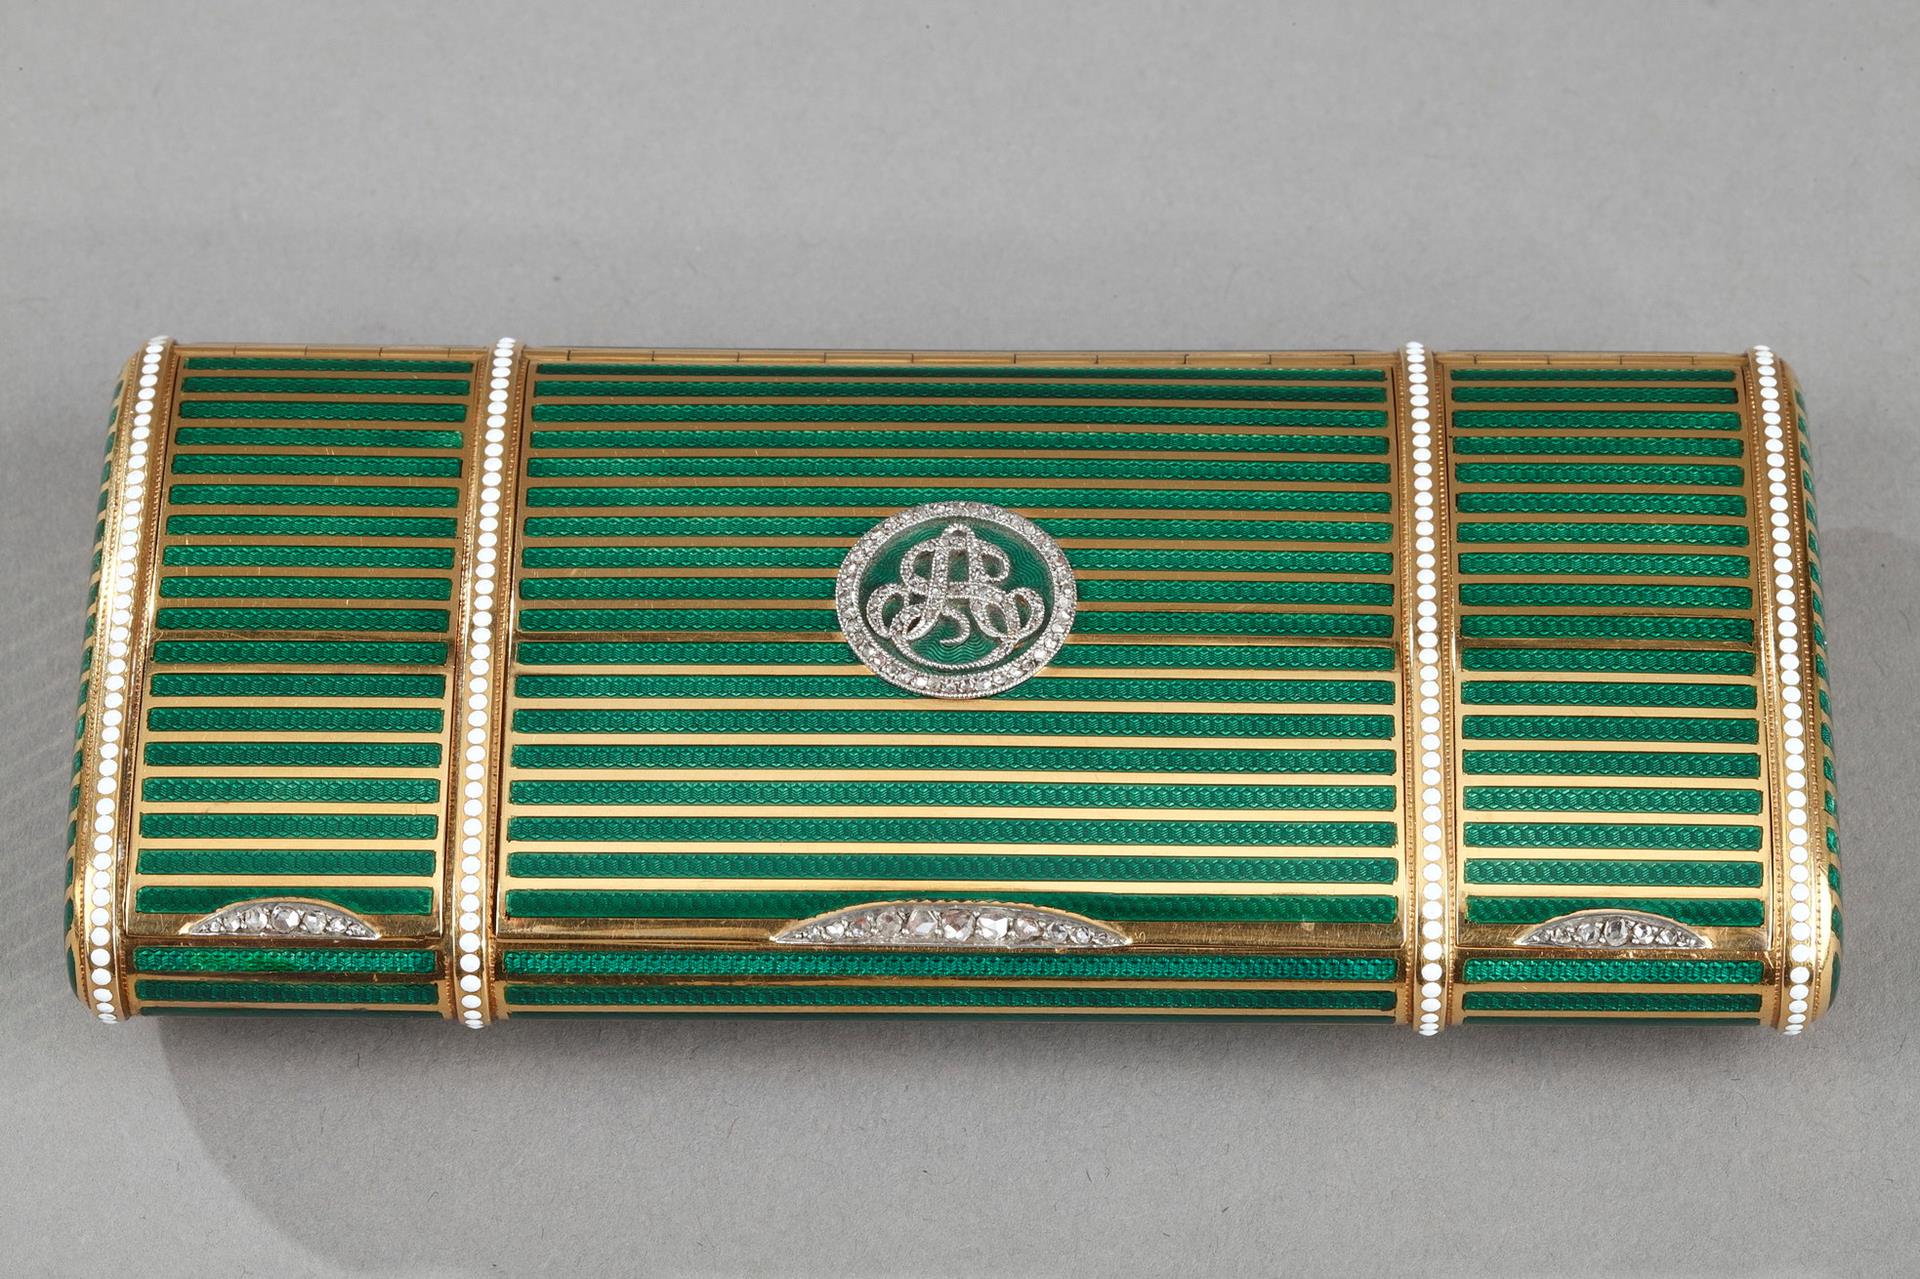 An early 20th century bi-colour Gold and enamel vanity case. 